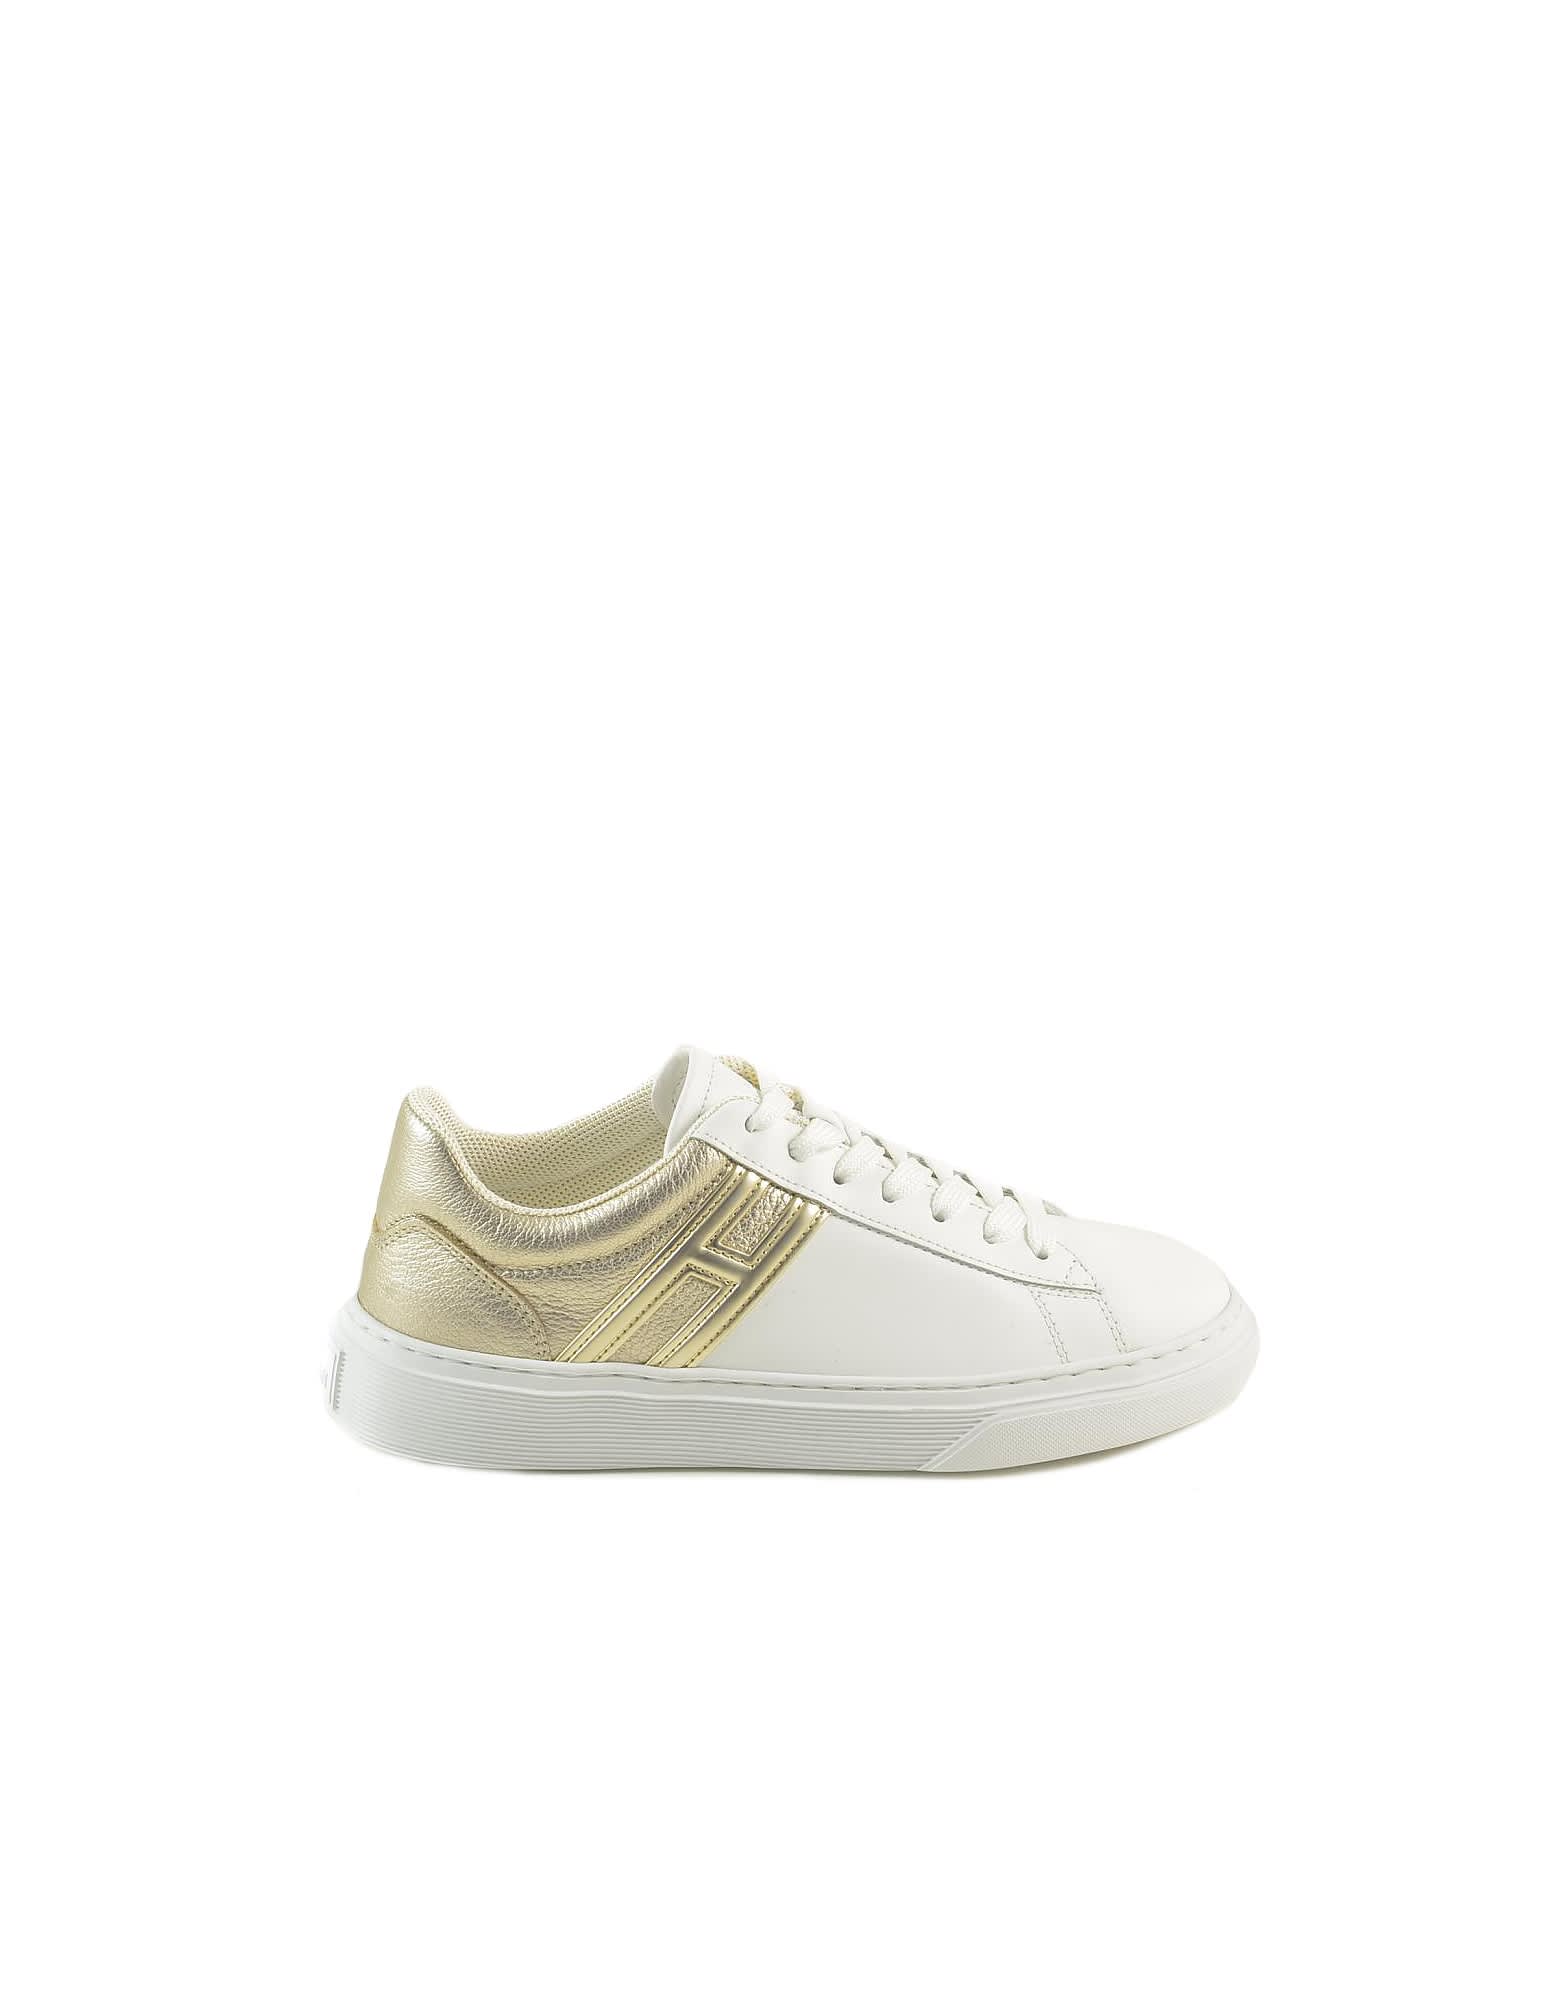 Hogan White/gold Leather Womens Sneakers